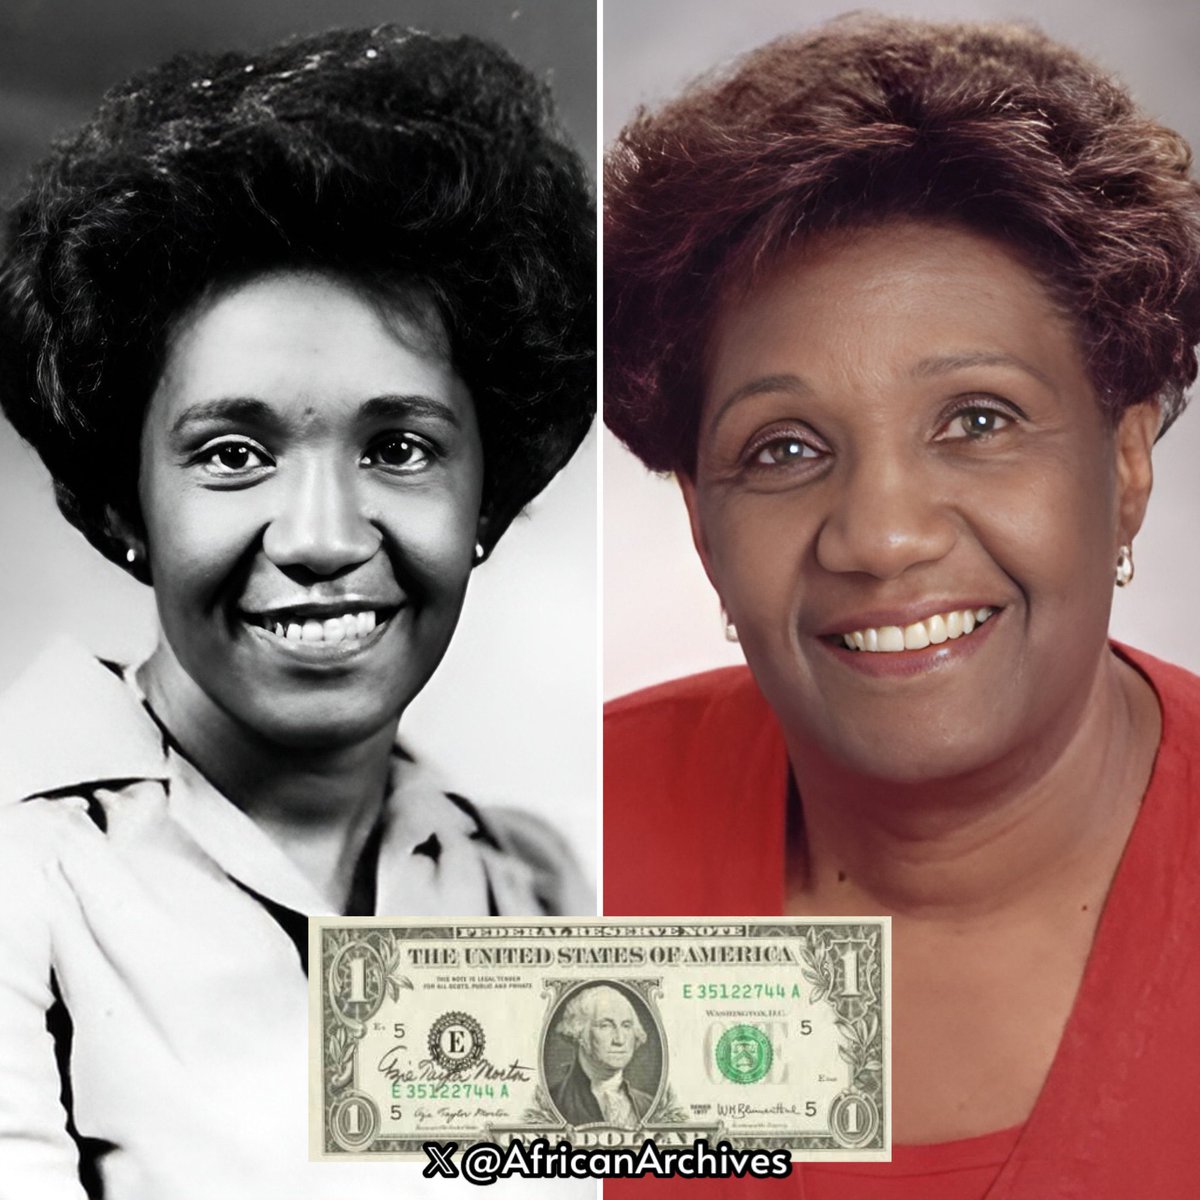 Azie Morton was the first and only black American to serve as U.S. Treasurer! She was appointed by President Jimmy Carter in 1977, she served as the 36th Treasurer until January 20, 1981. All bills 💵printed during that time has her signature on it. #WomenHistoryMonth —Azie…